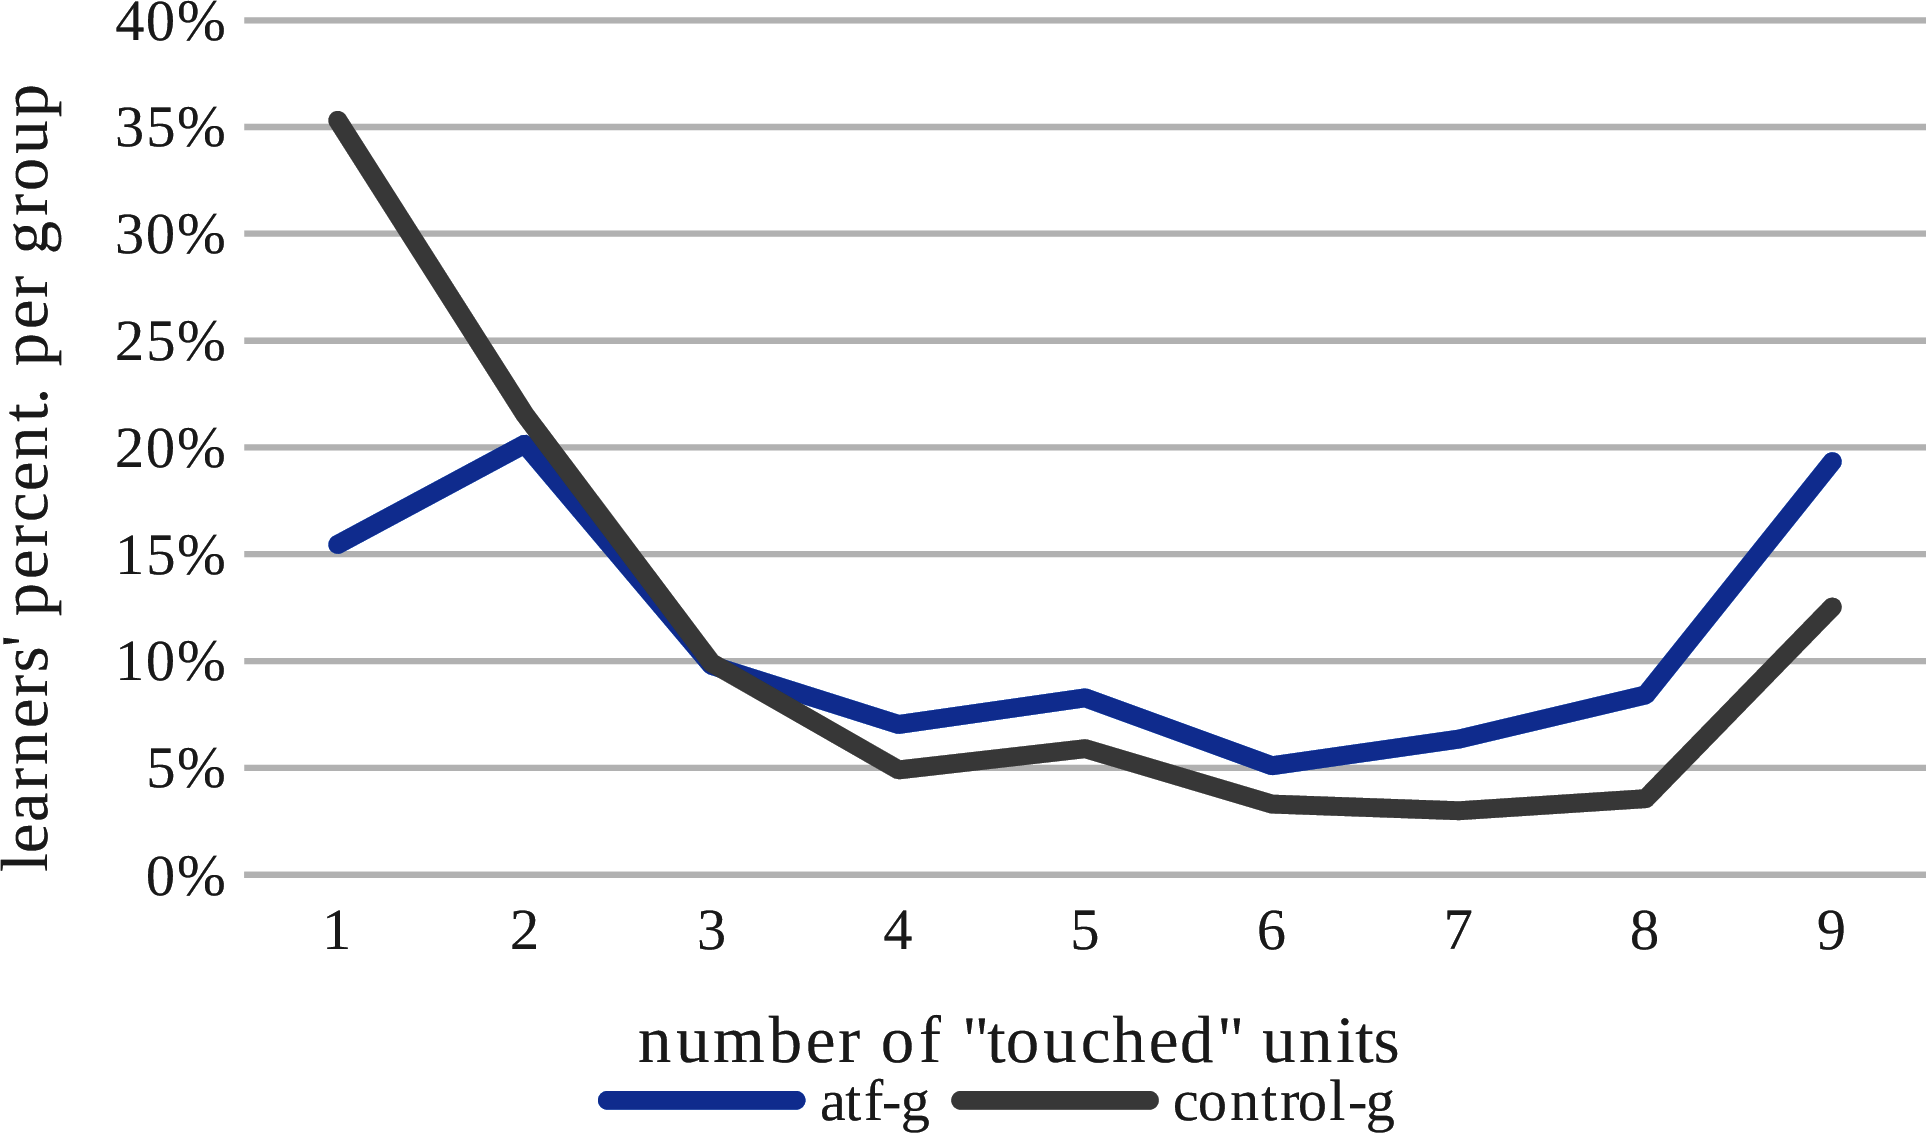 The graph indicates a higher percentage of learners of atf-g "touched" each number of units, from the 3 units and above.